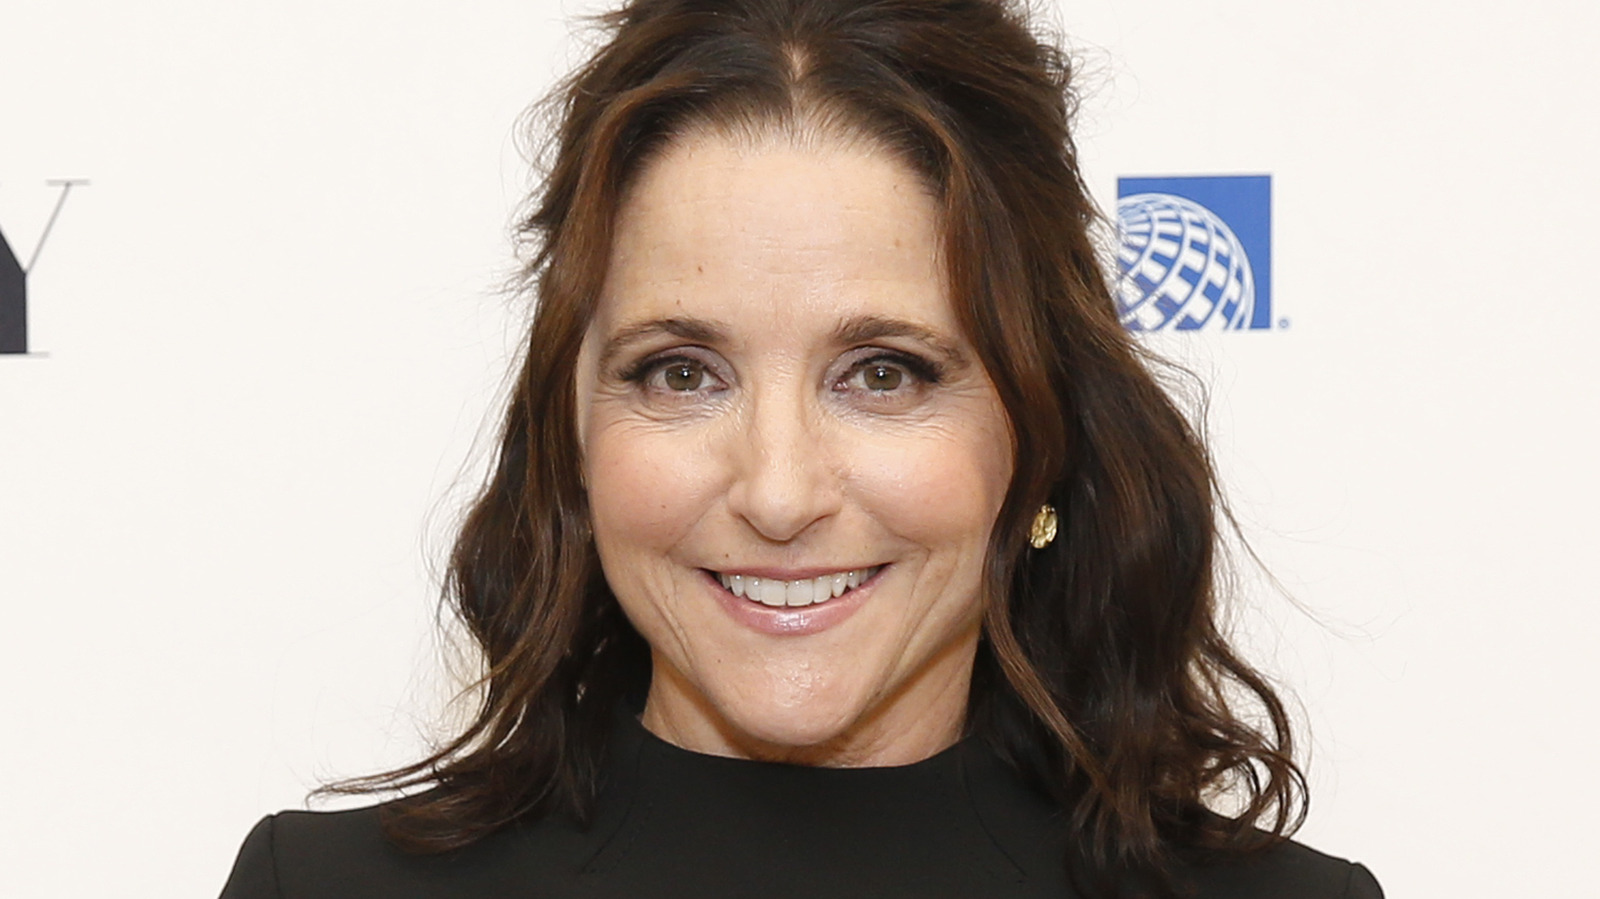 julia louis dreyfus comes from an extremely wealthy family